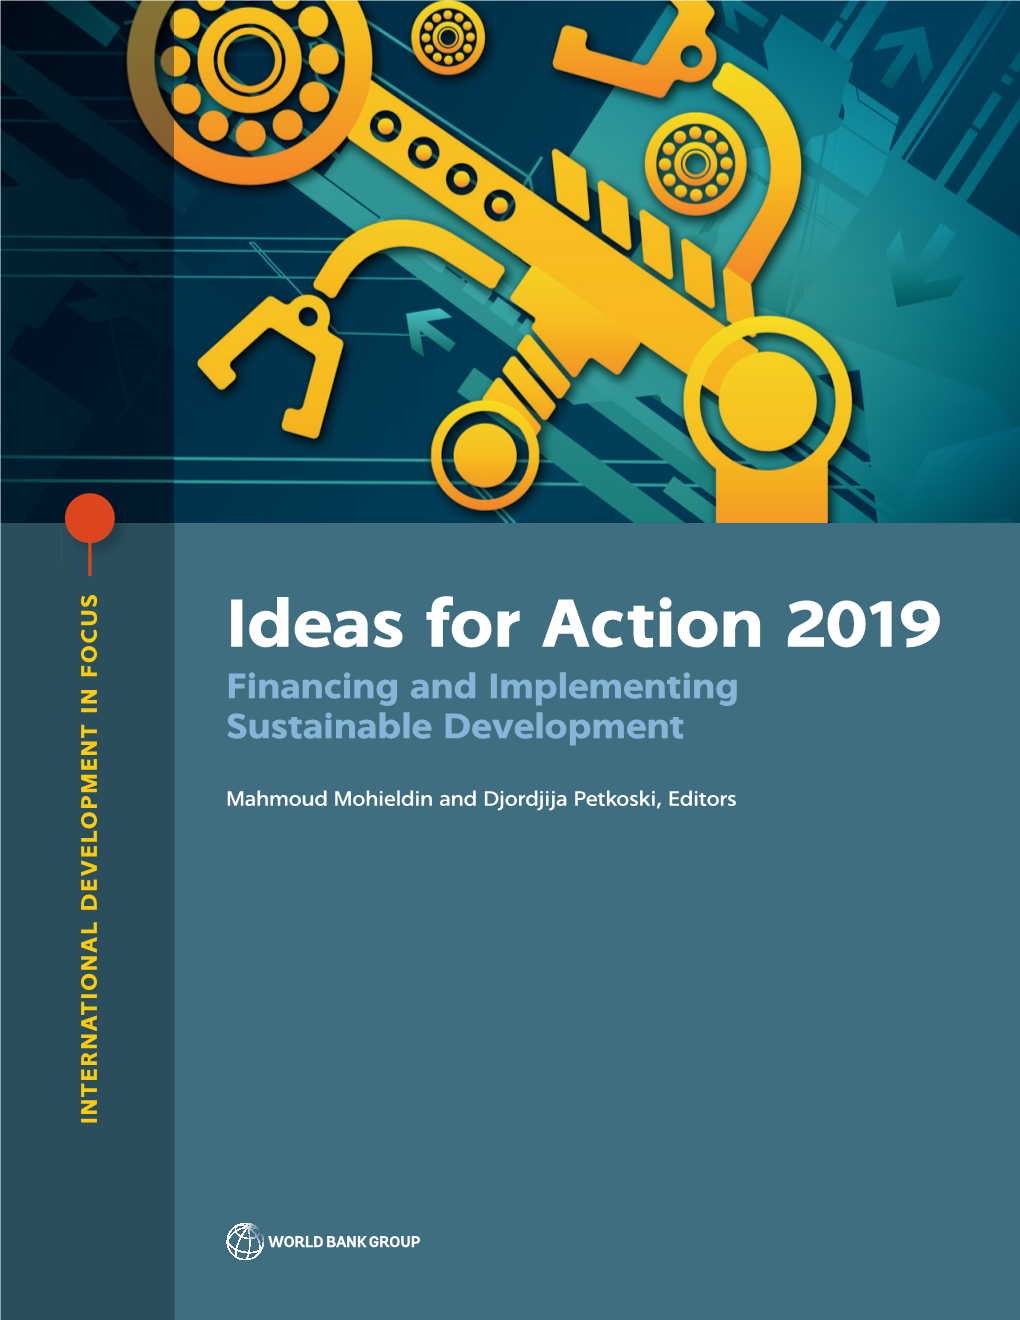 Ideas for Action 2019 People Have Ideas to Make an Exponential Impact